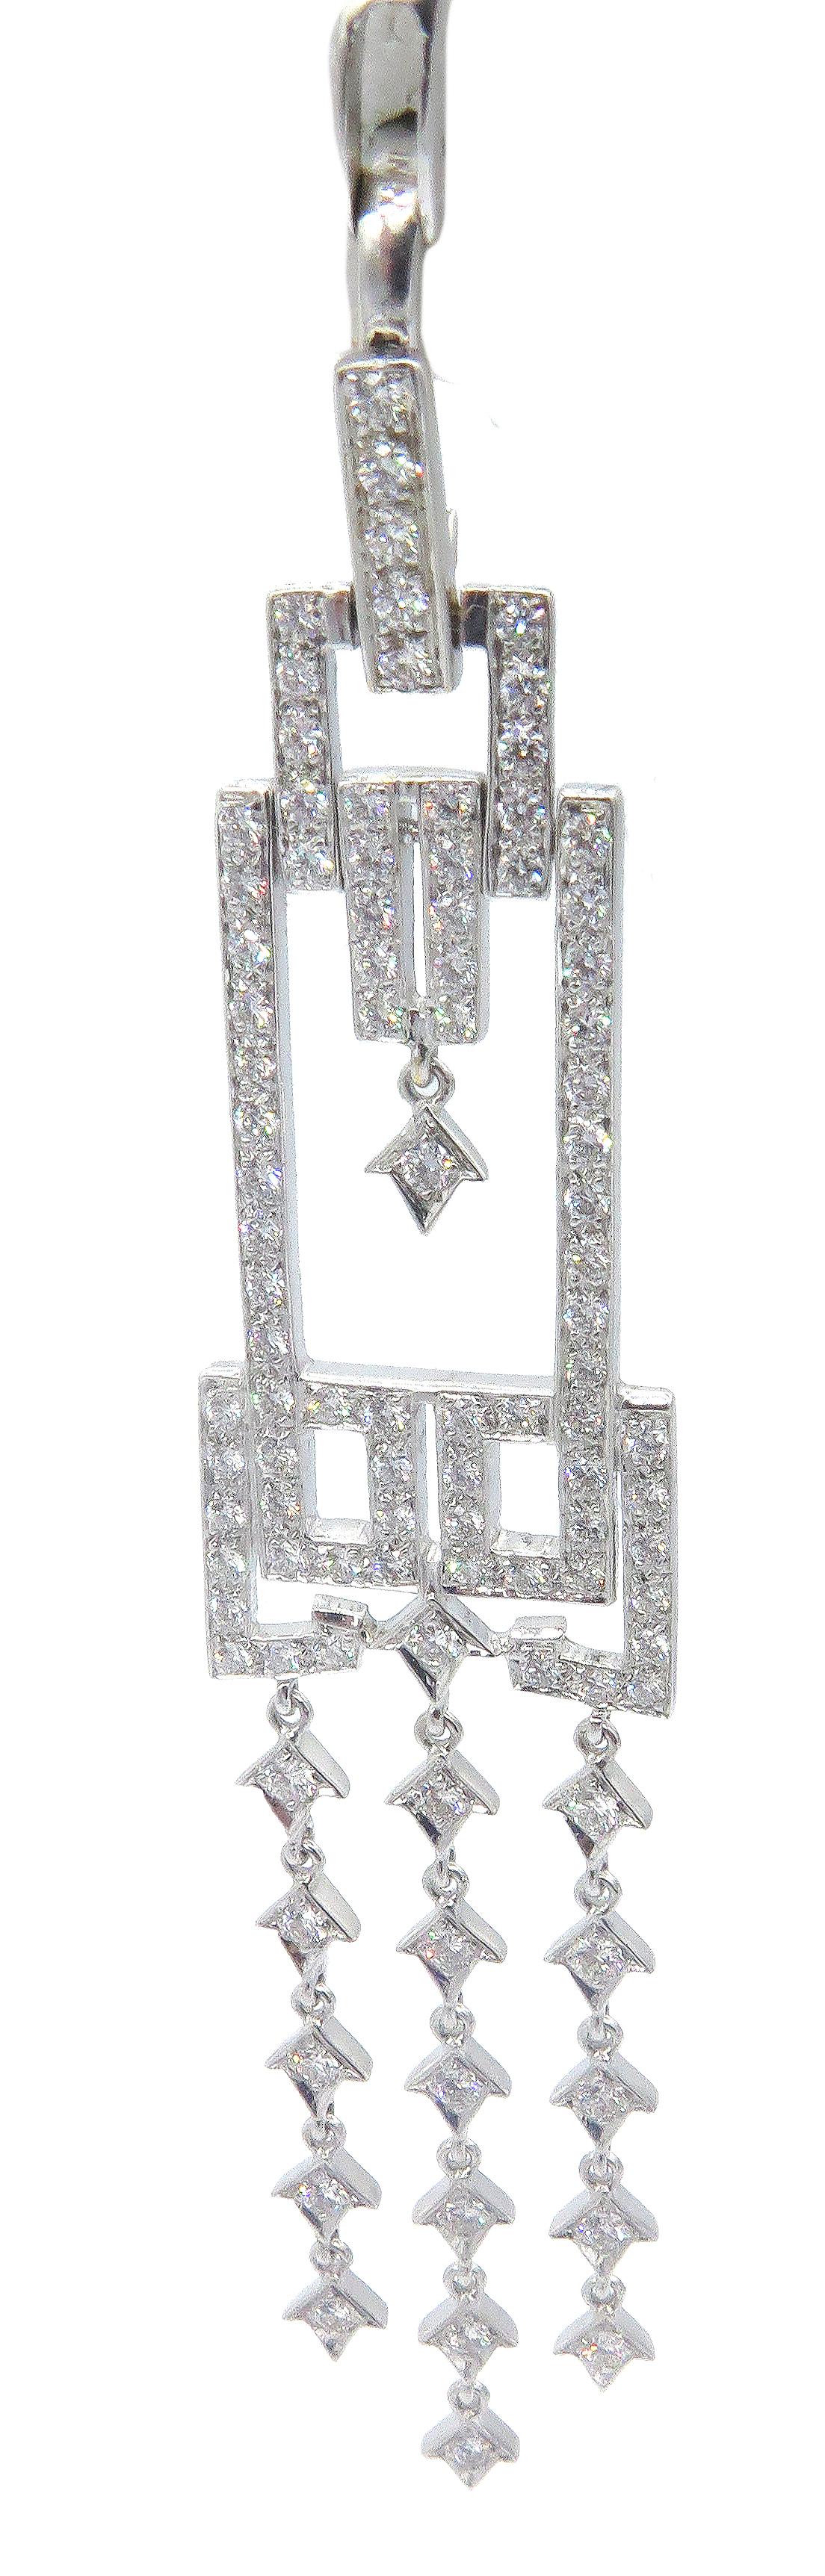 Beautifully, designed art deco diamond pendant by NINI. Made in 18k white gold with a beautiful setting and selection of round small diamonds that cover and brighten this gorgeous pendant. The pendant is 3.5